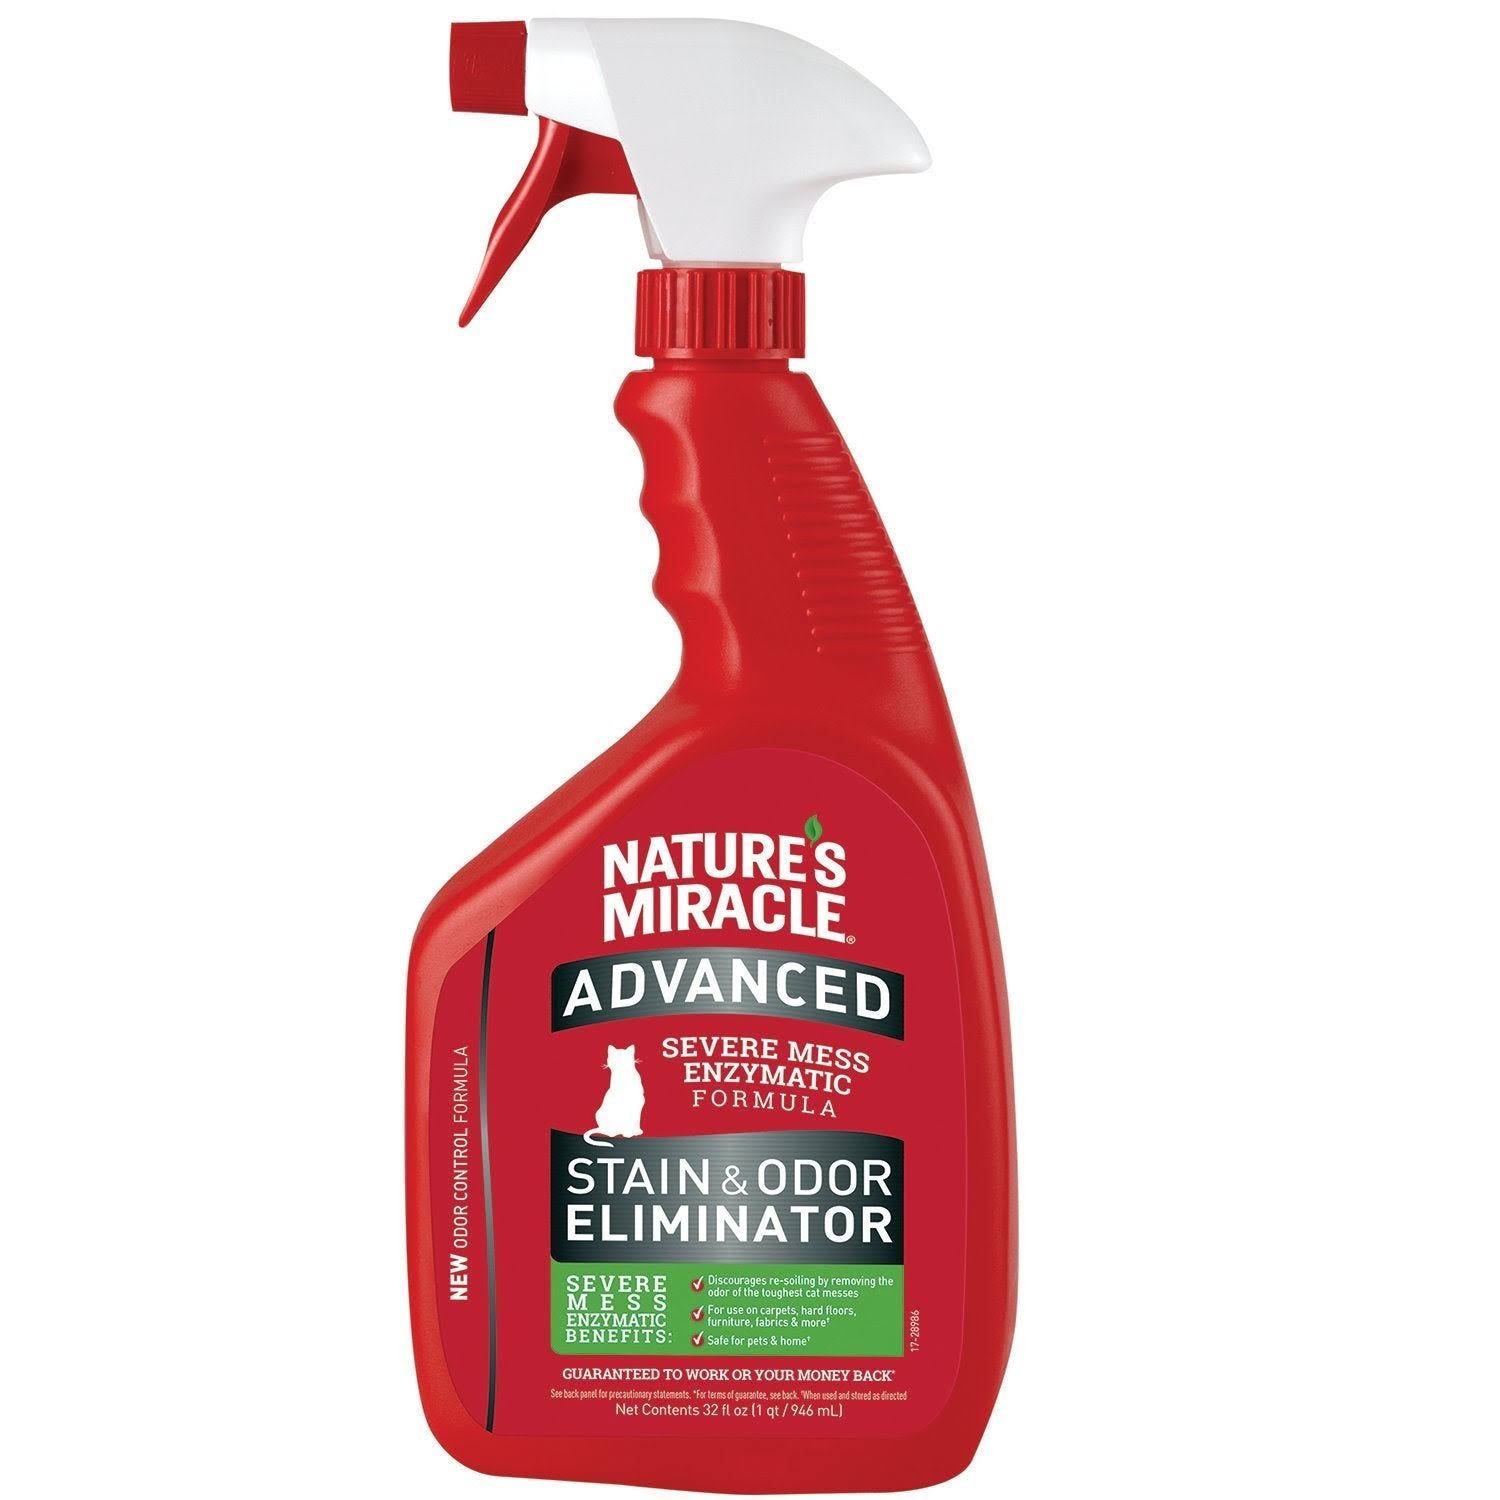 Nature's Miracle Just for Cats Advanced Stain and Odor Remover Spray - 32oz